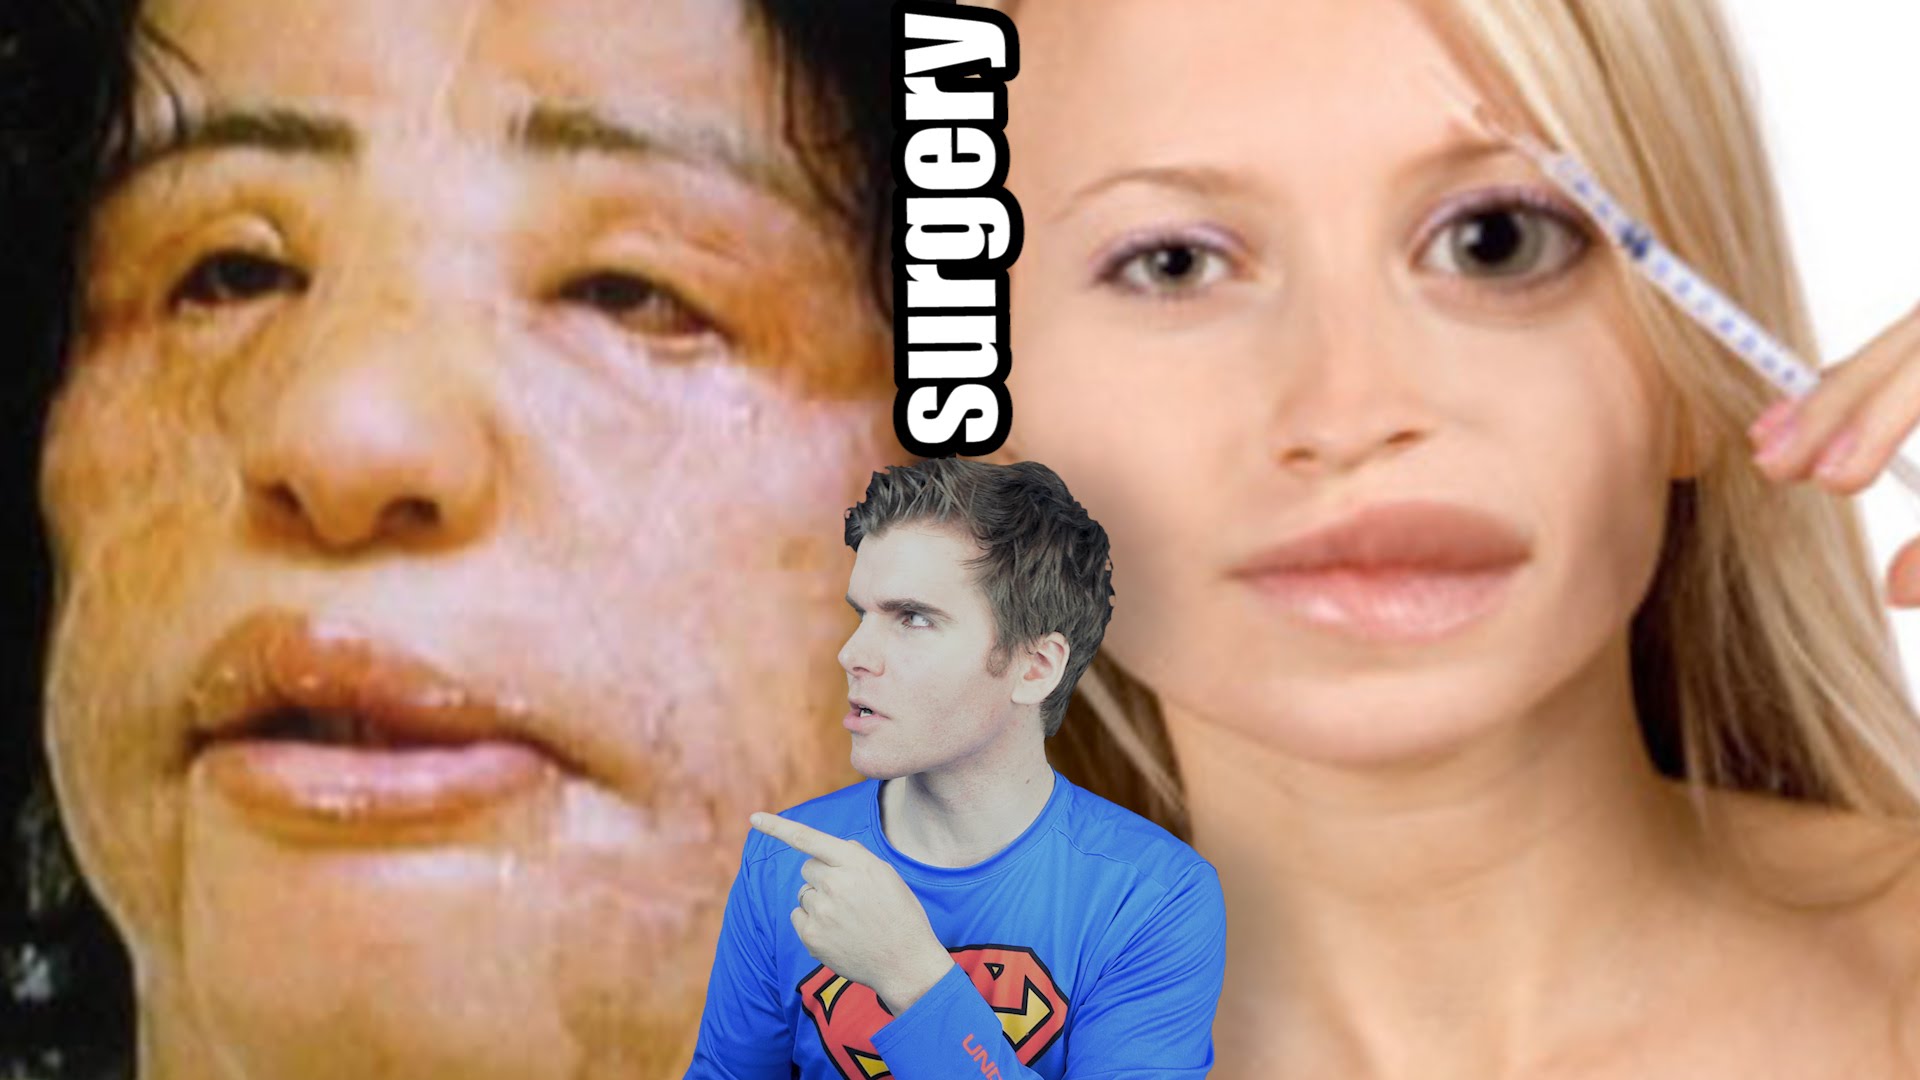 Plastic Surgery Gone Wrong (Before And After) | Onision Wiki | Fandom